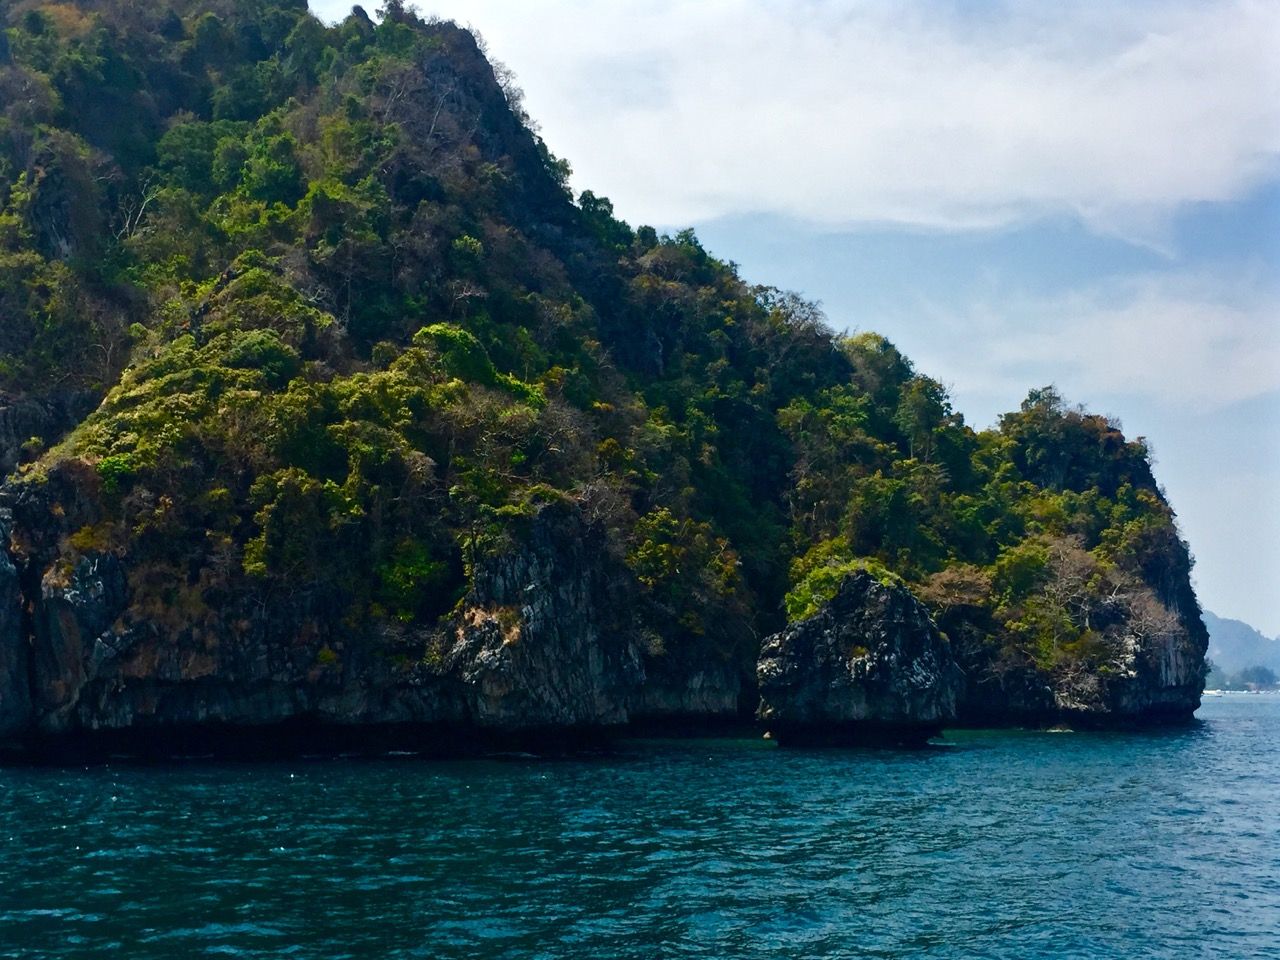 Tree-covered islands with steep cliffs meeting the ocean.